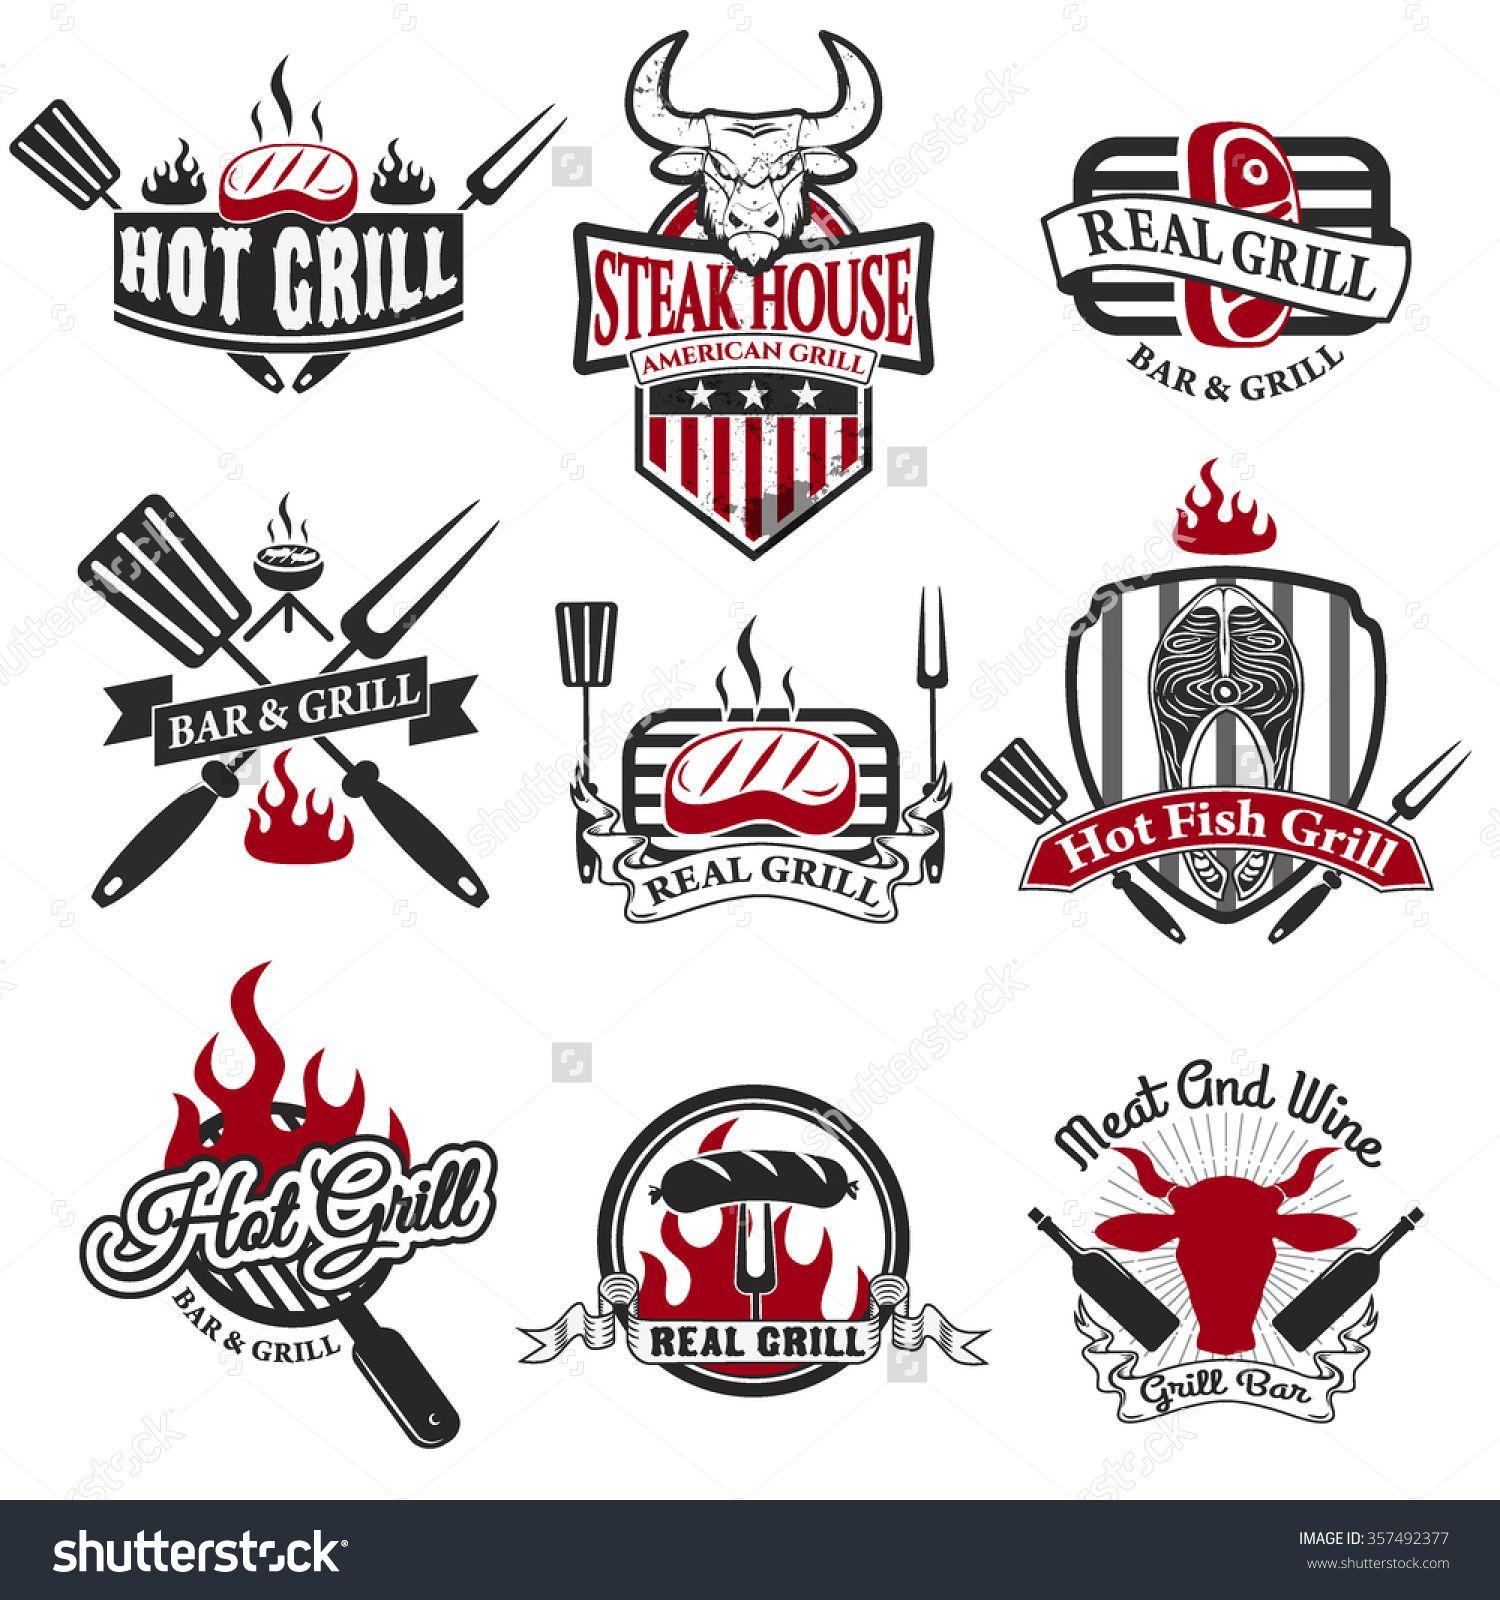 Restaurant Bar and Grill Logo - Set of grill bar labels, logos and badges templates. Steak house